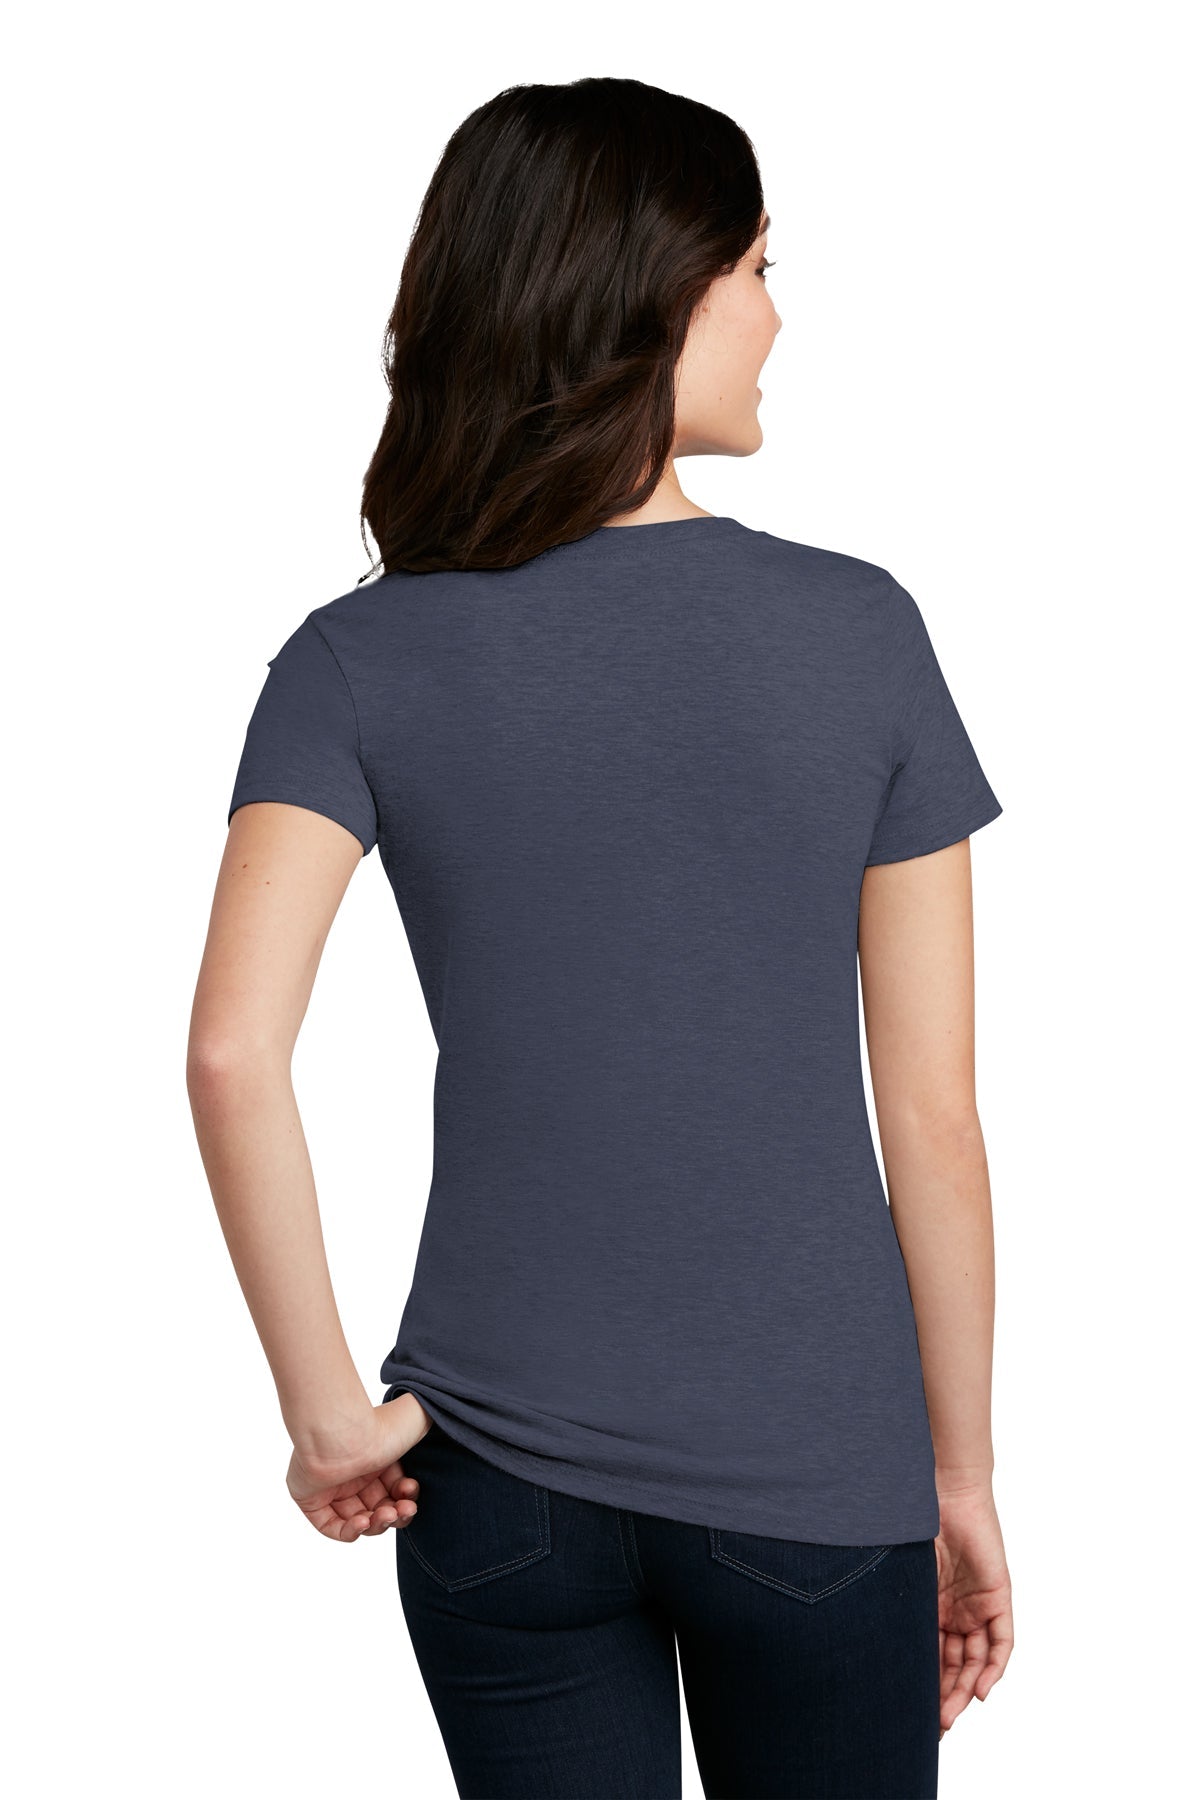 District Made Ladies Perfect Blend Crew Tee's, Heathered Navy